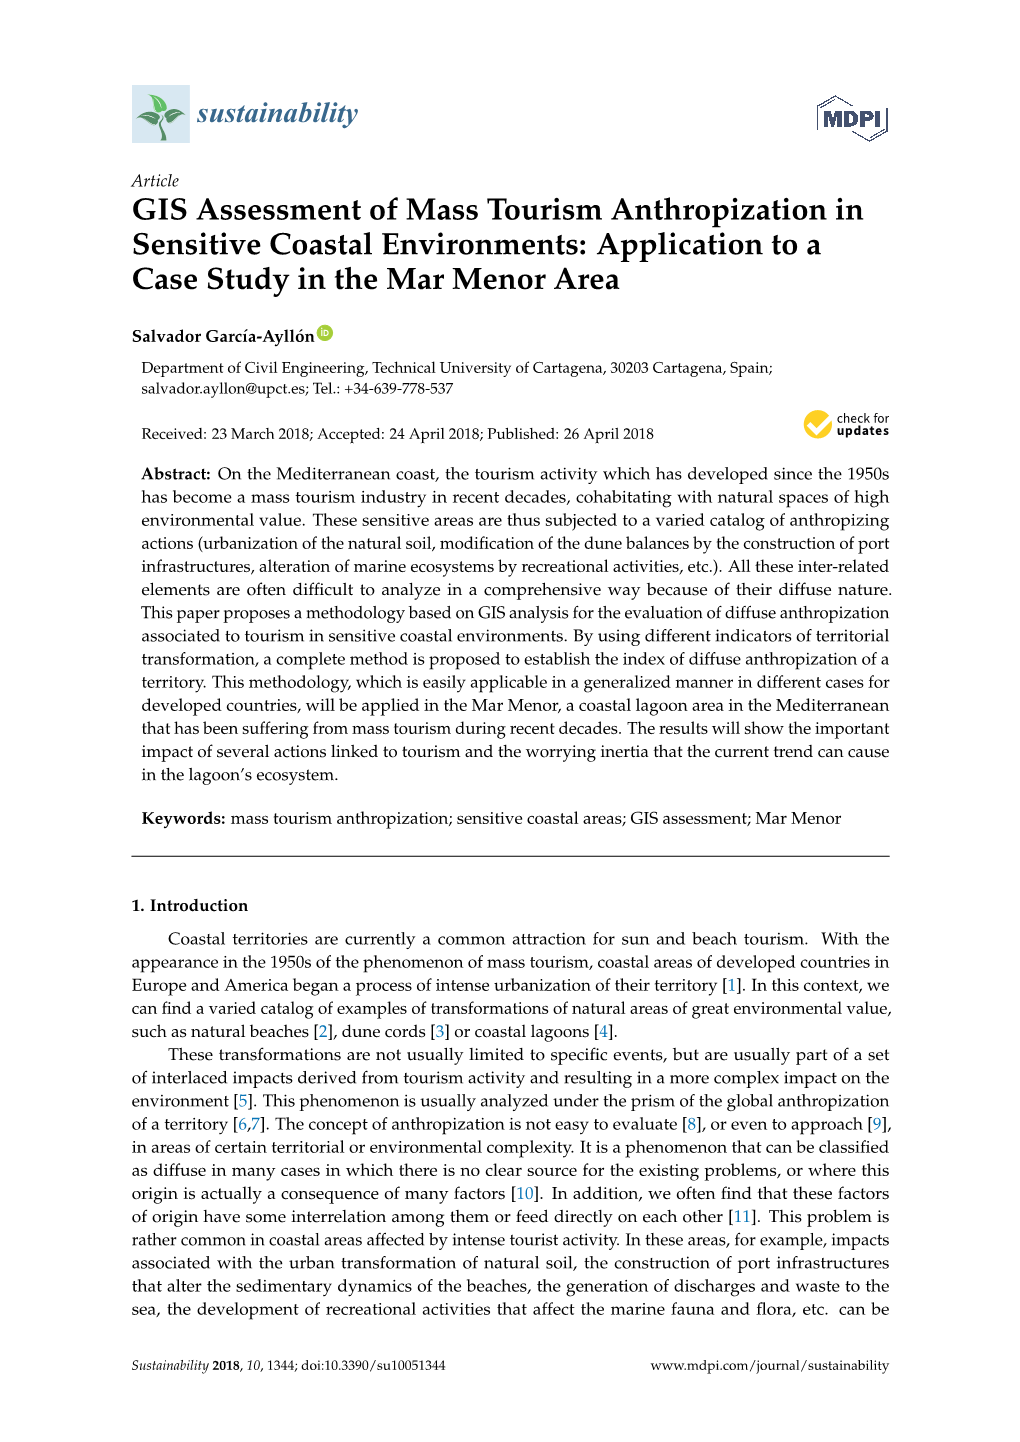 GIS Assessment of Mass Tourism Anthropization in Sensitive Coastal Environments: Application to a Case Study in the Mar Menor Area